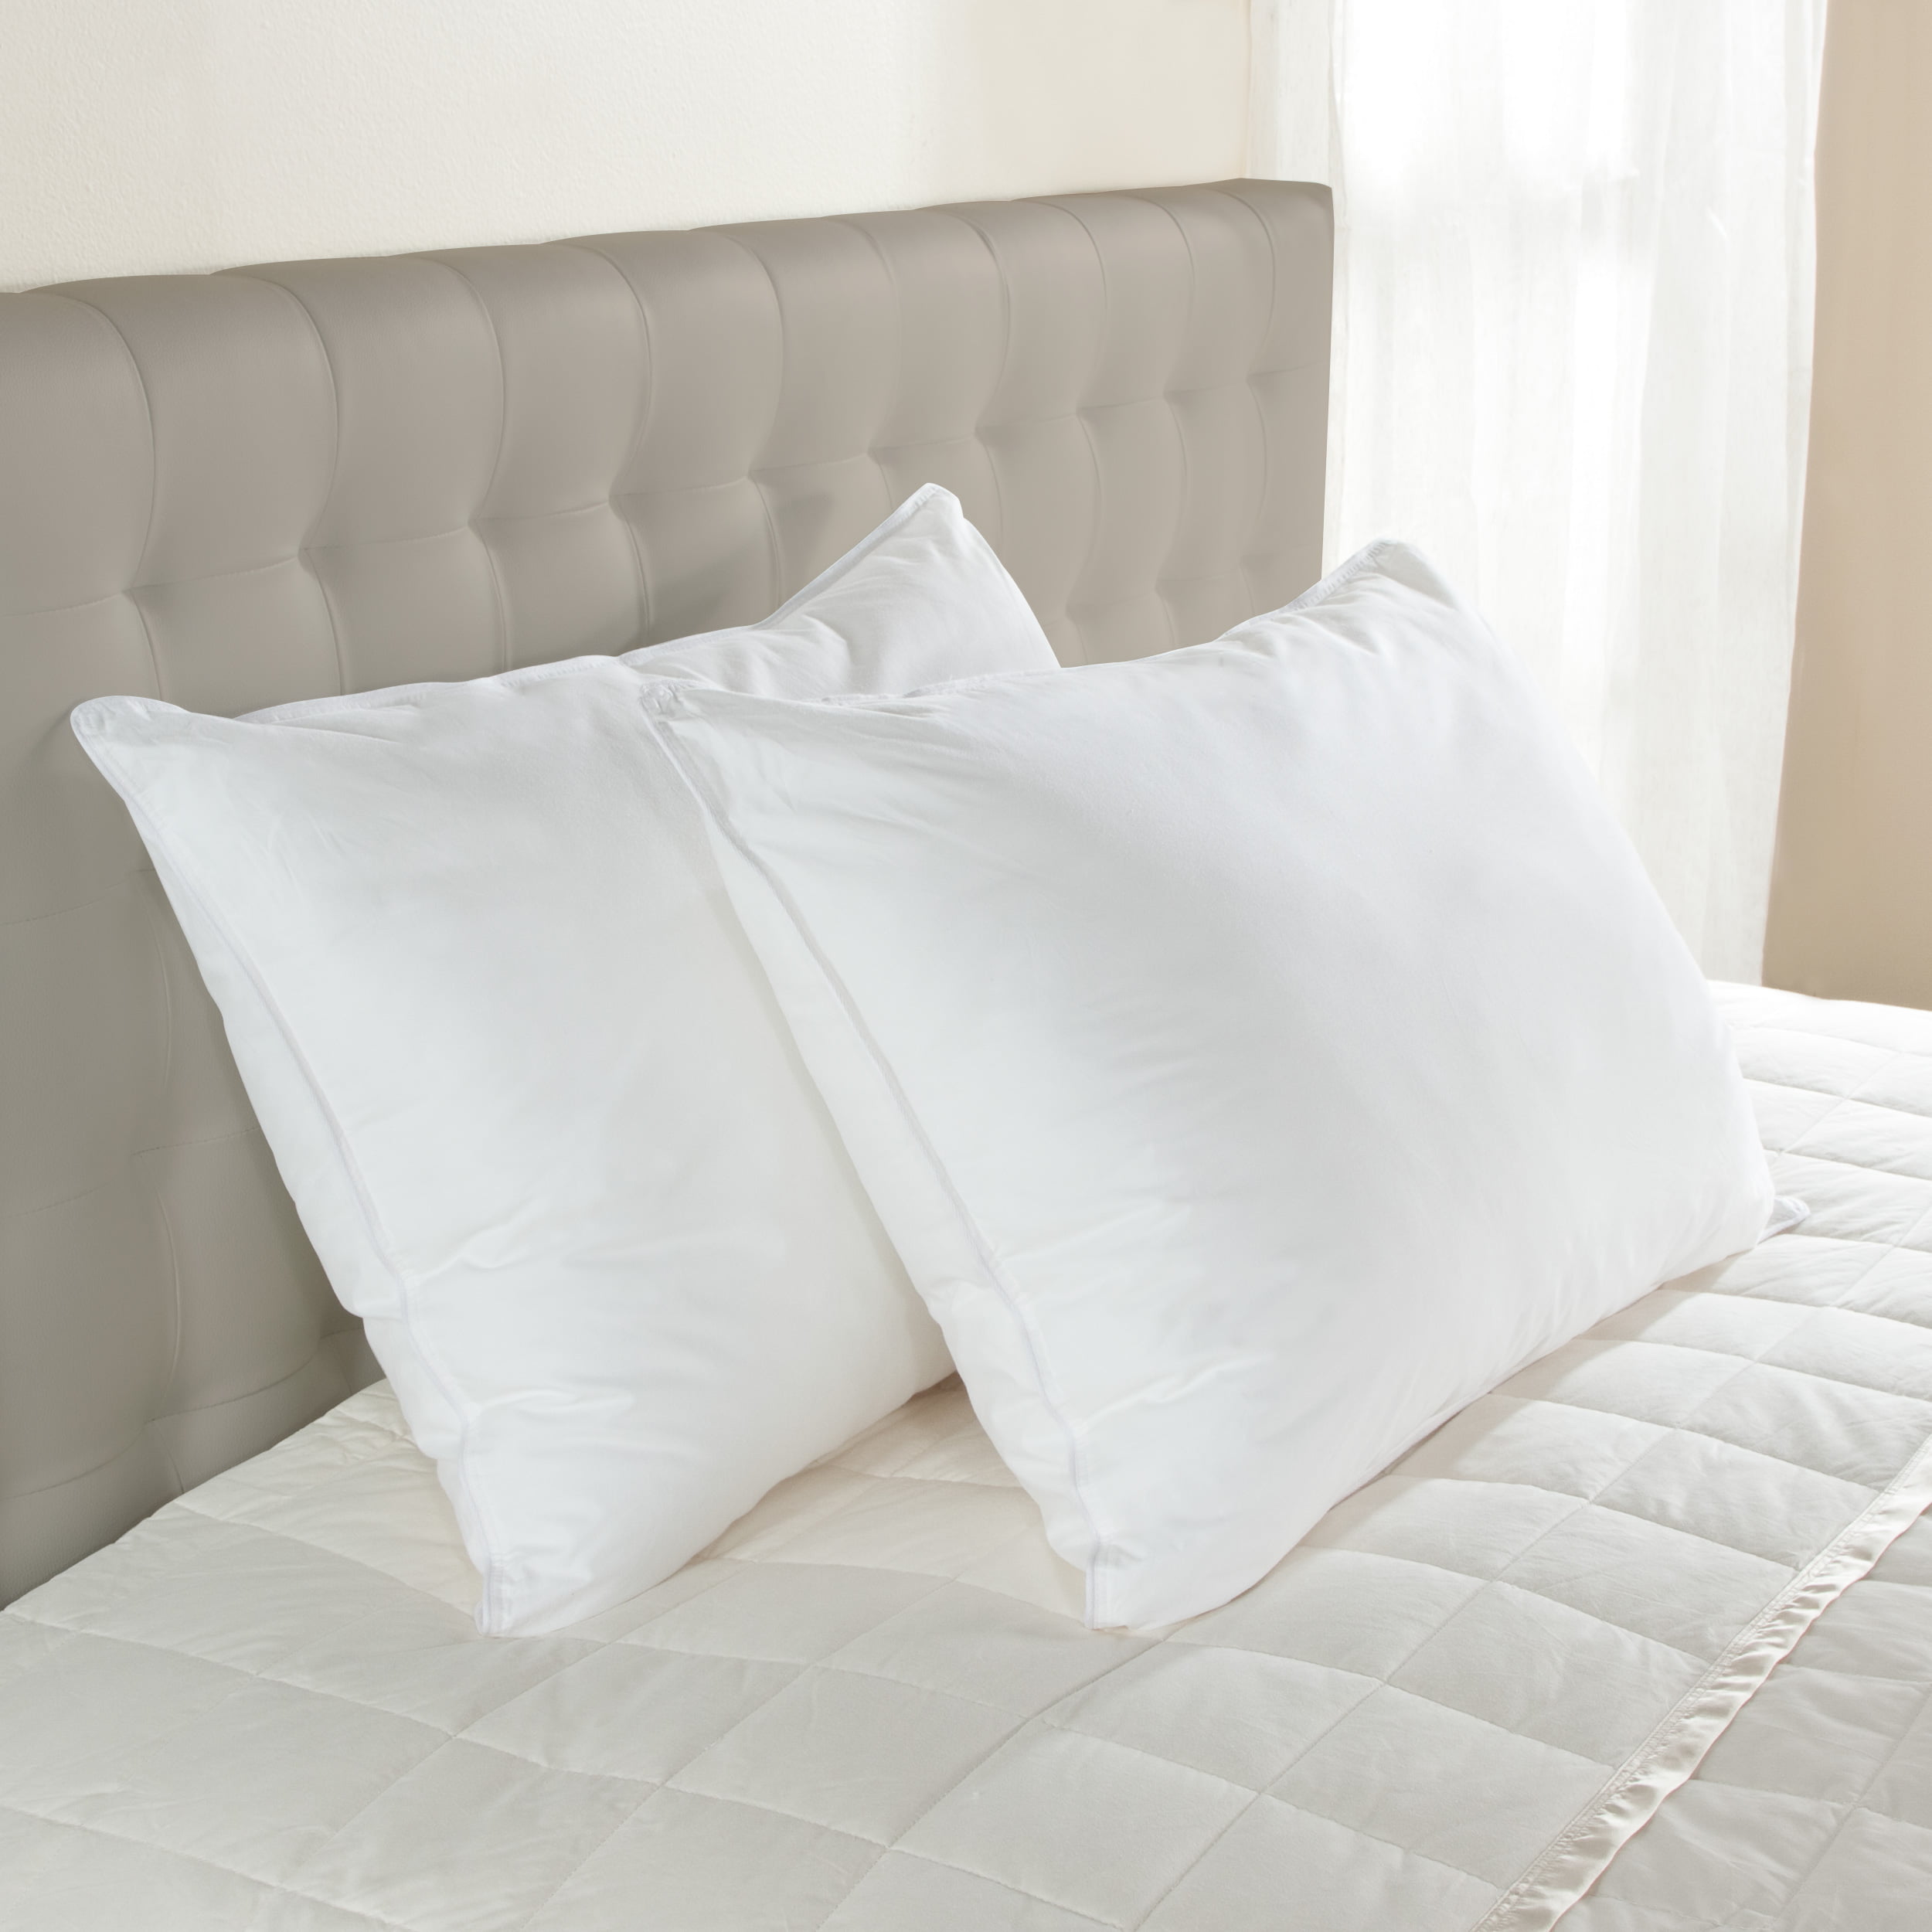 Details about   Set of 2 Queen/Standard Bed Pillows for Sleeping Luxury Plush Down Alternative 